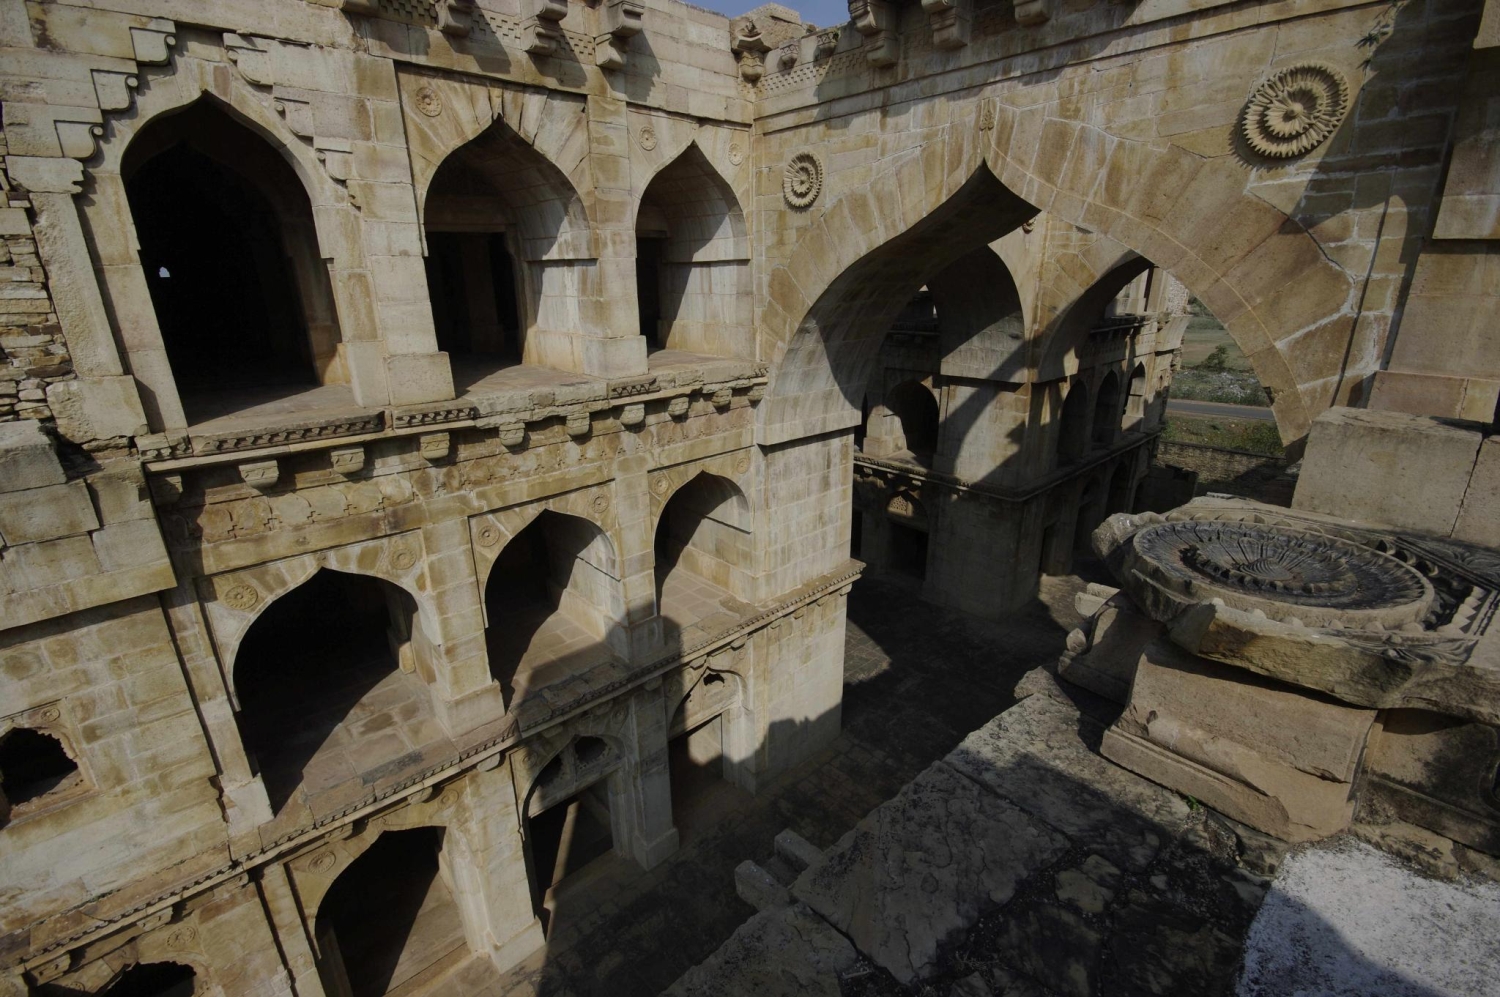 Elevated view within the palace